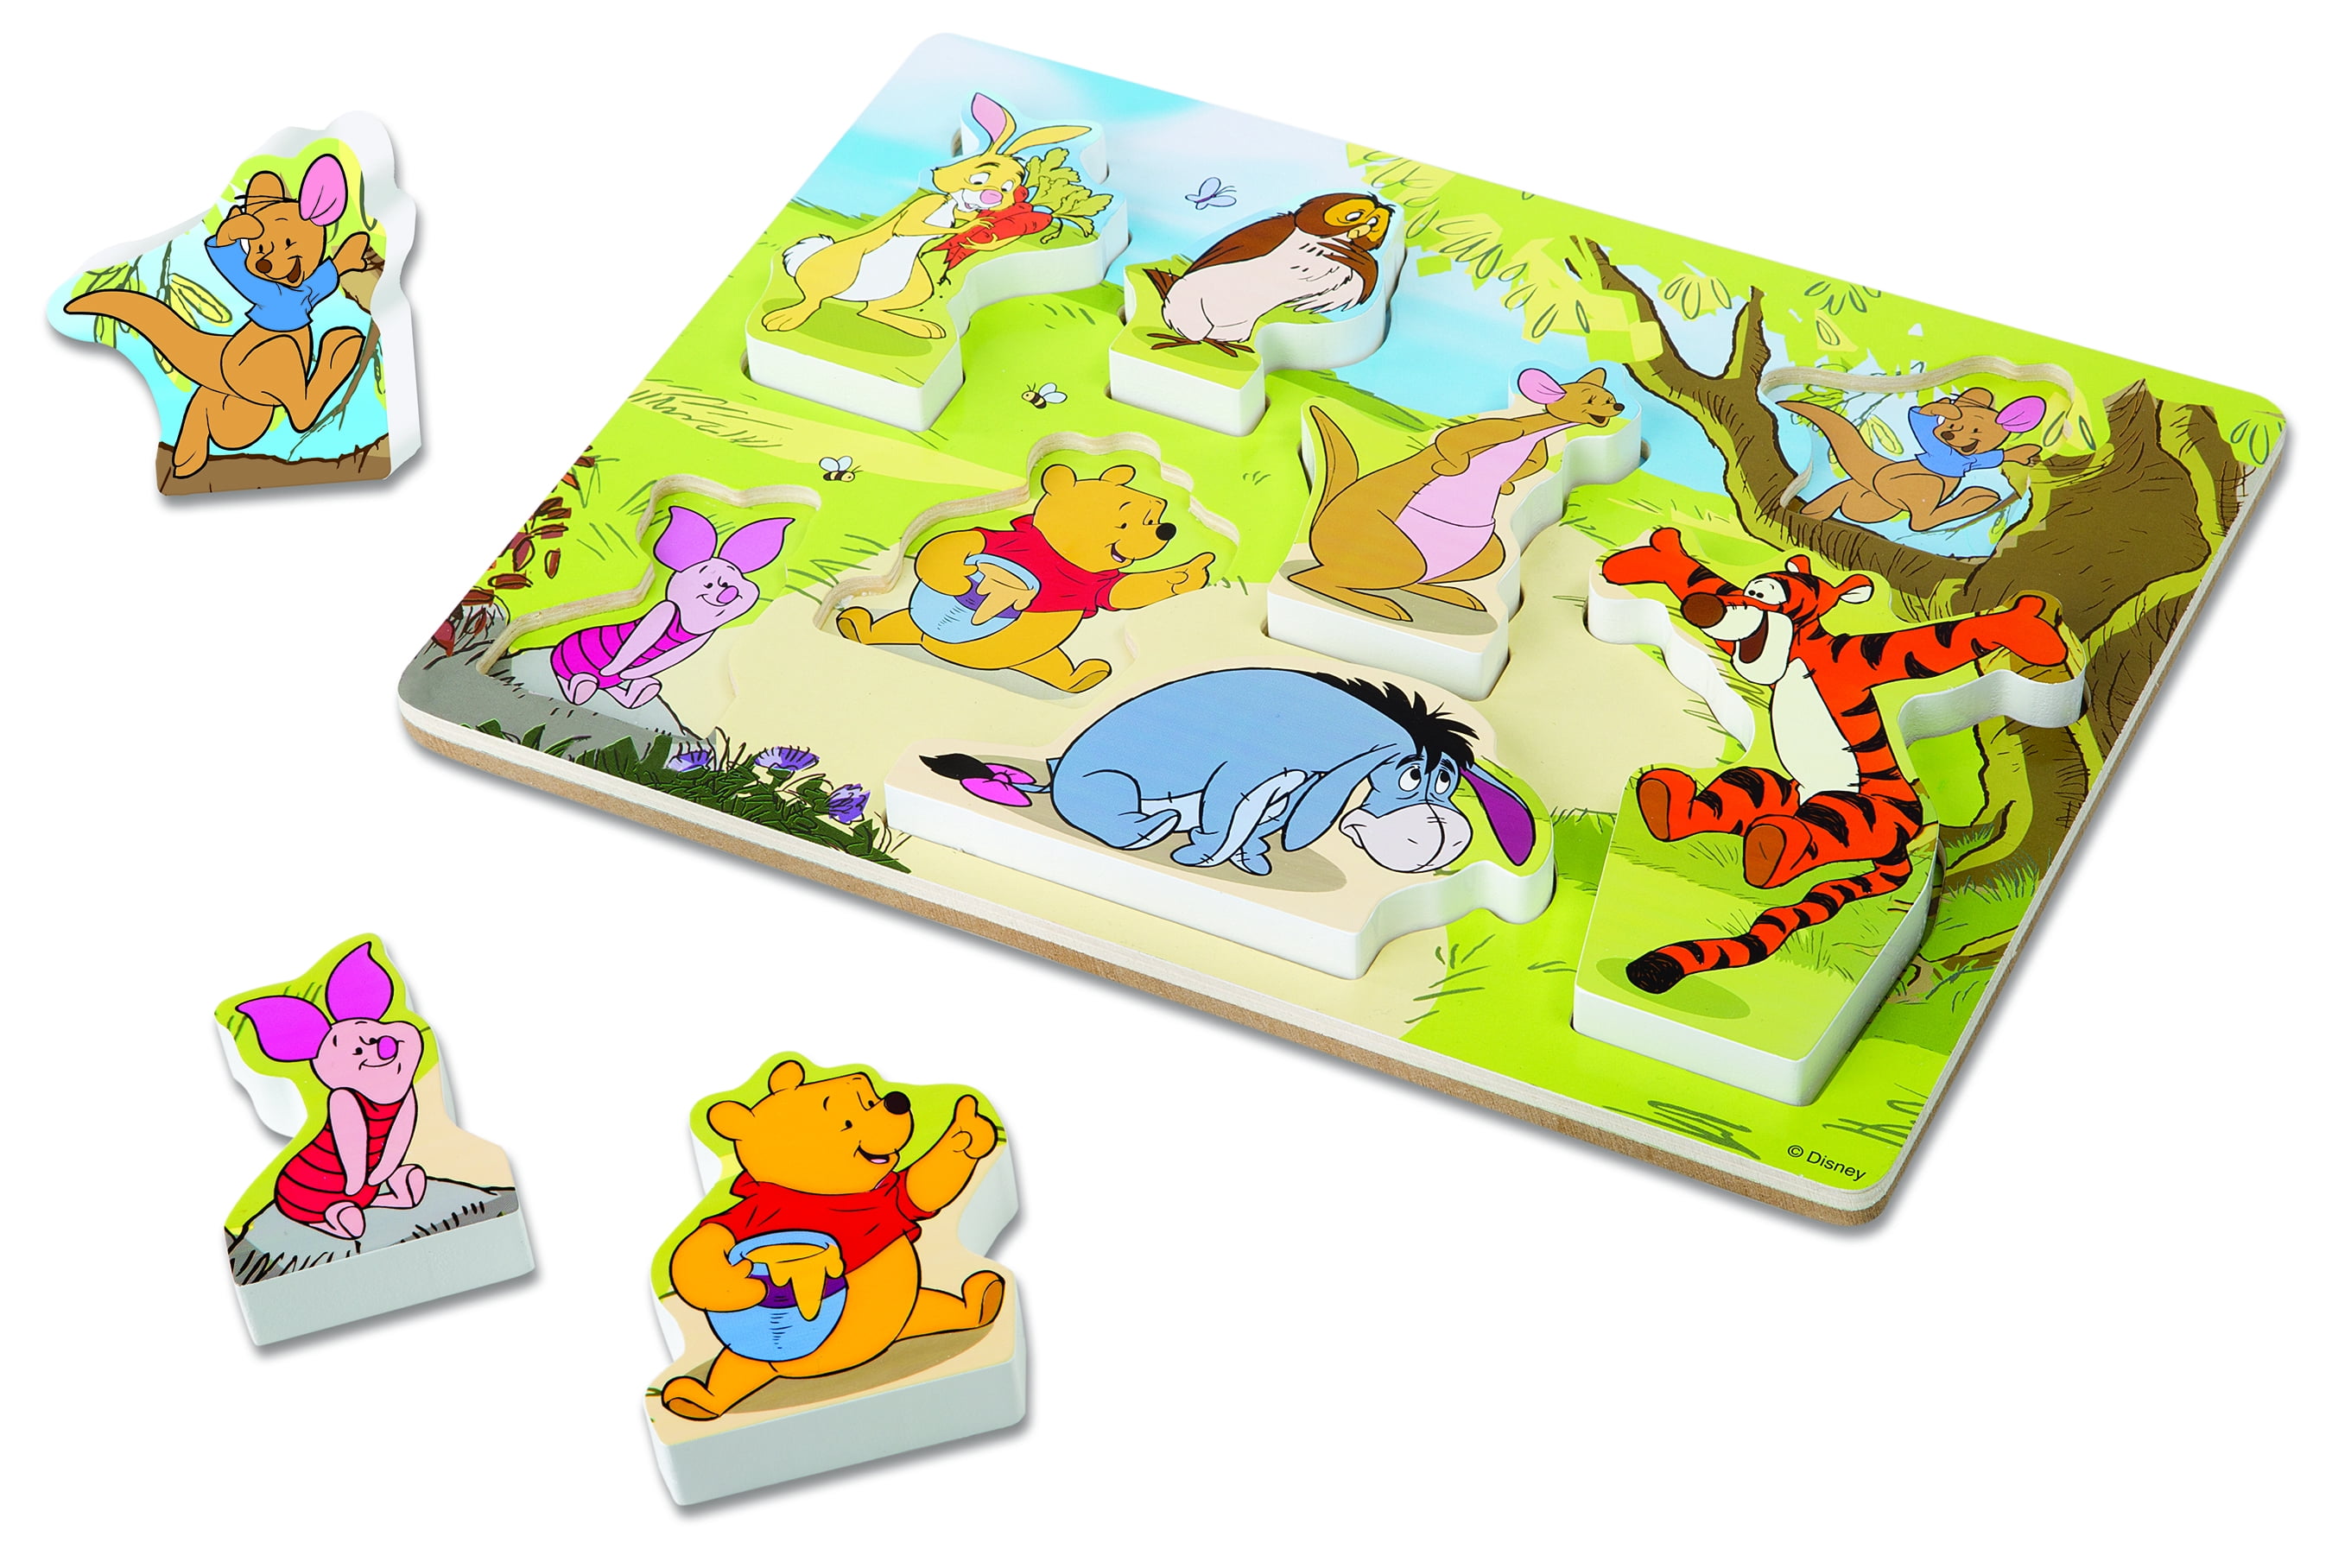 DISNEY Winnie the Pooh Shapes Sound learning toy Wooden Peg Puzzle-2+ NEW 